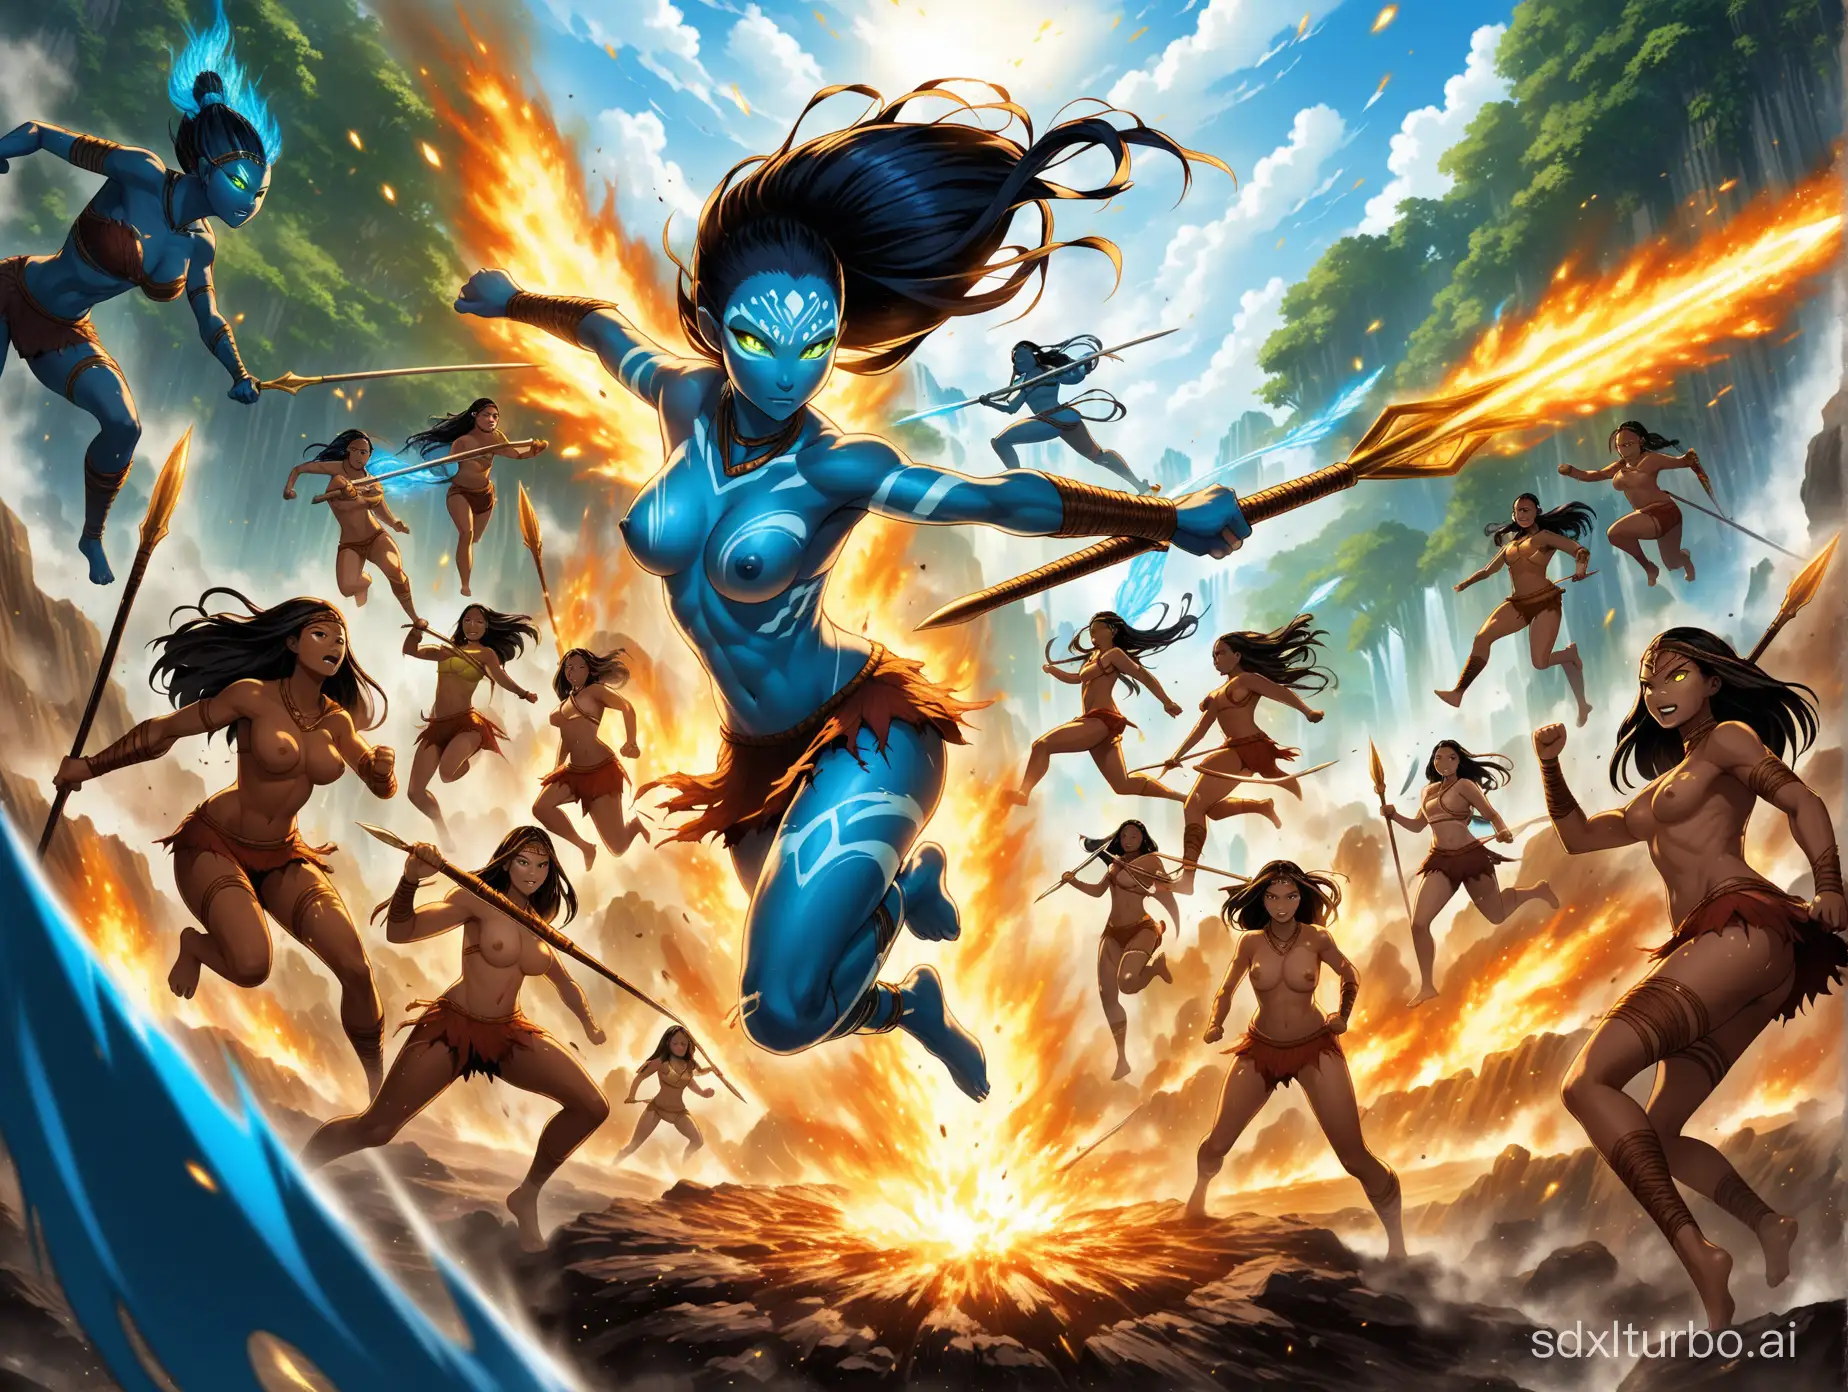 dense diverse group of blue running nude fitness model Avatar assassins with spears, leaping and kicking, in battle, burning glowing super power eyes, deep v-necks, like blue Na'Vi from Avatar movie, midriffs, torn ripped short skirts, nude naked parts showing under shredded clothes, punching, ripped and torn underwear, nipples, dirty splatter, fling, violent explosion